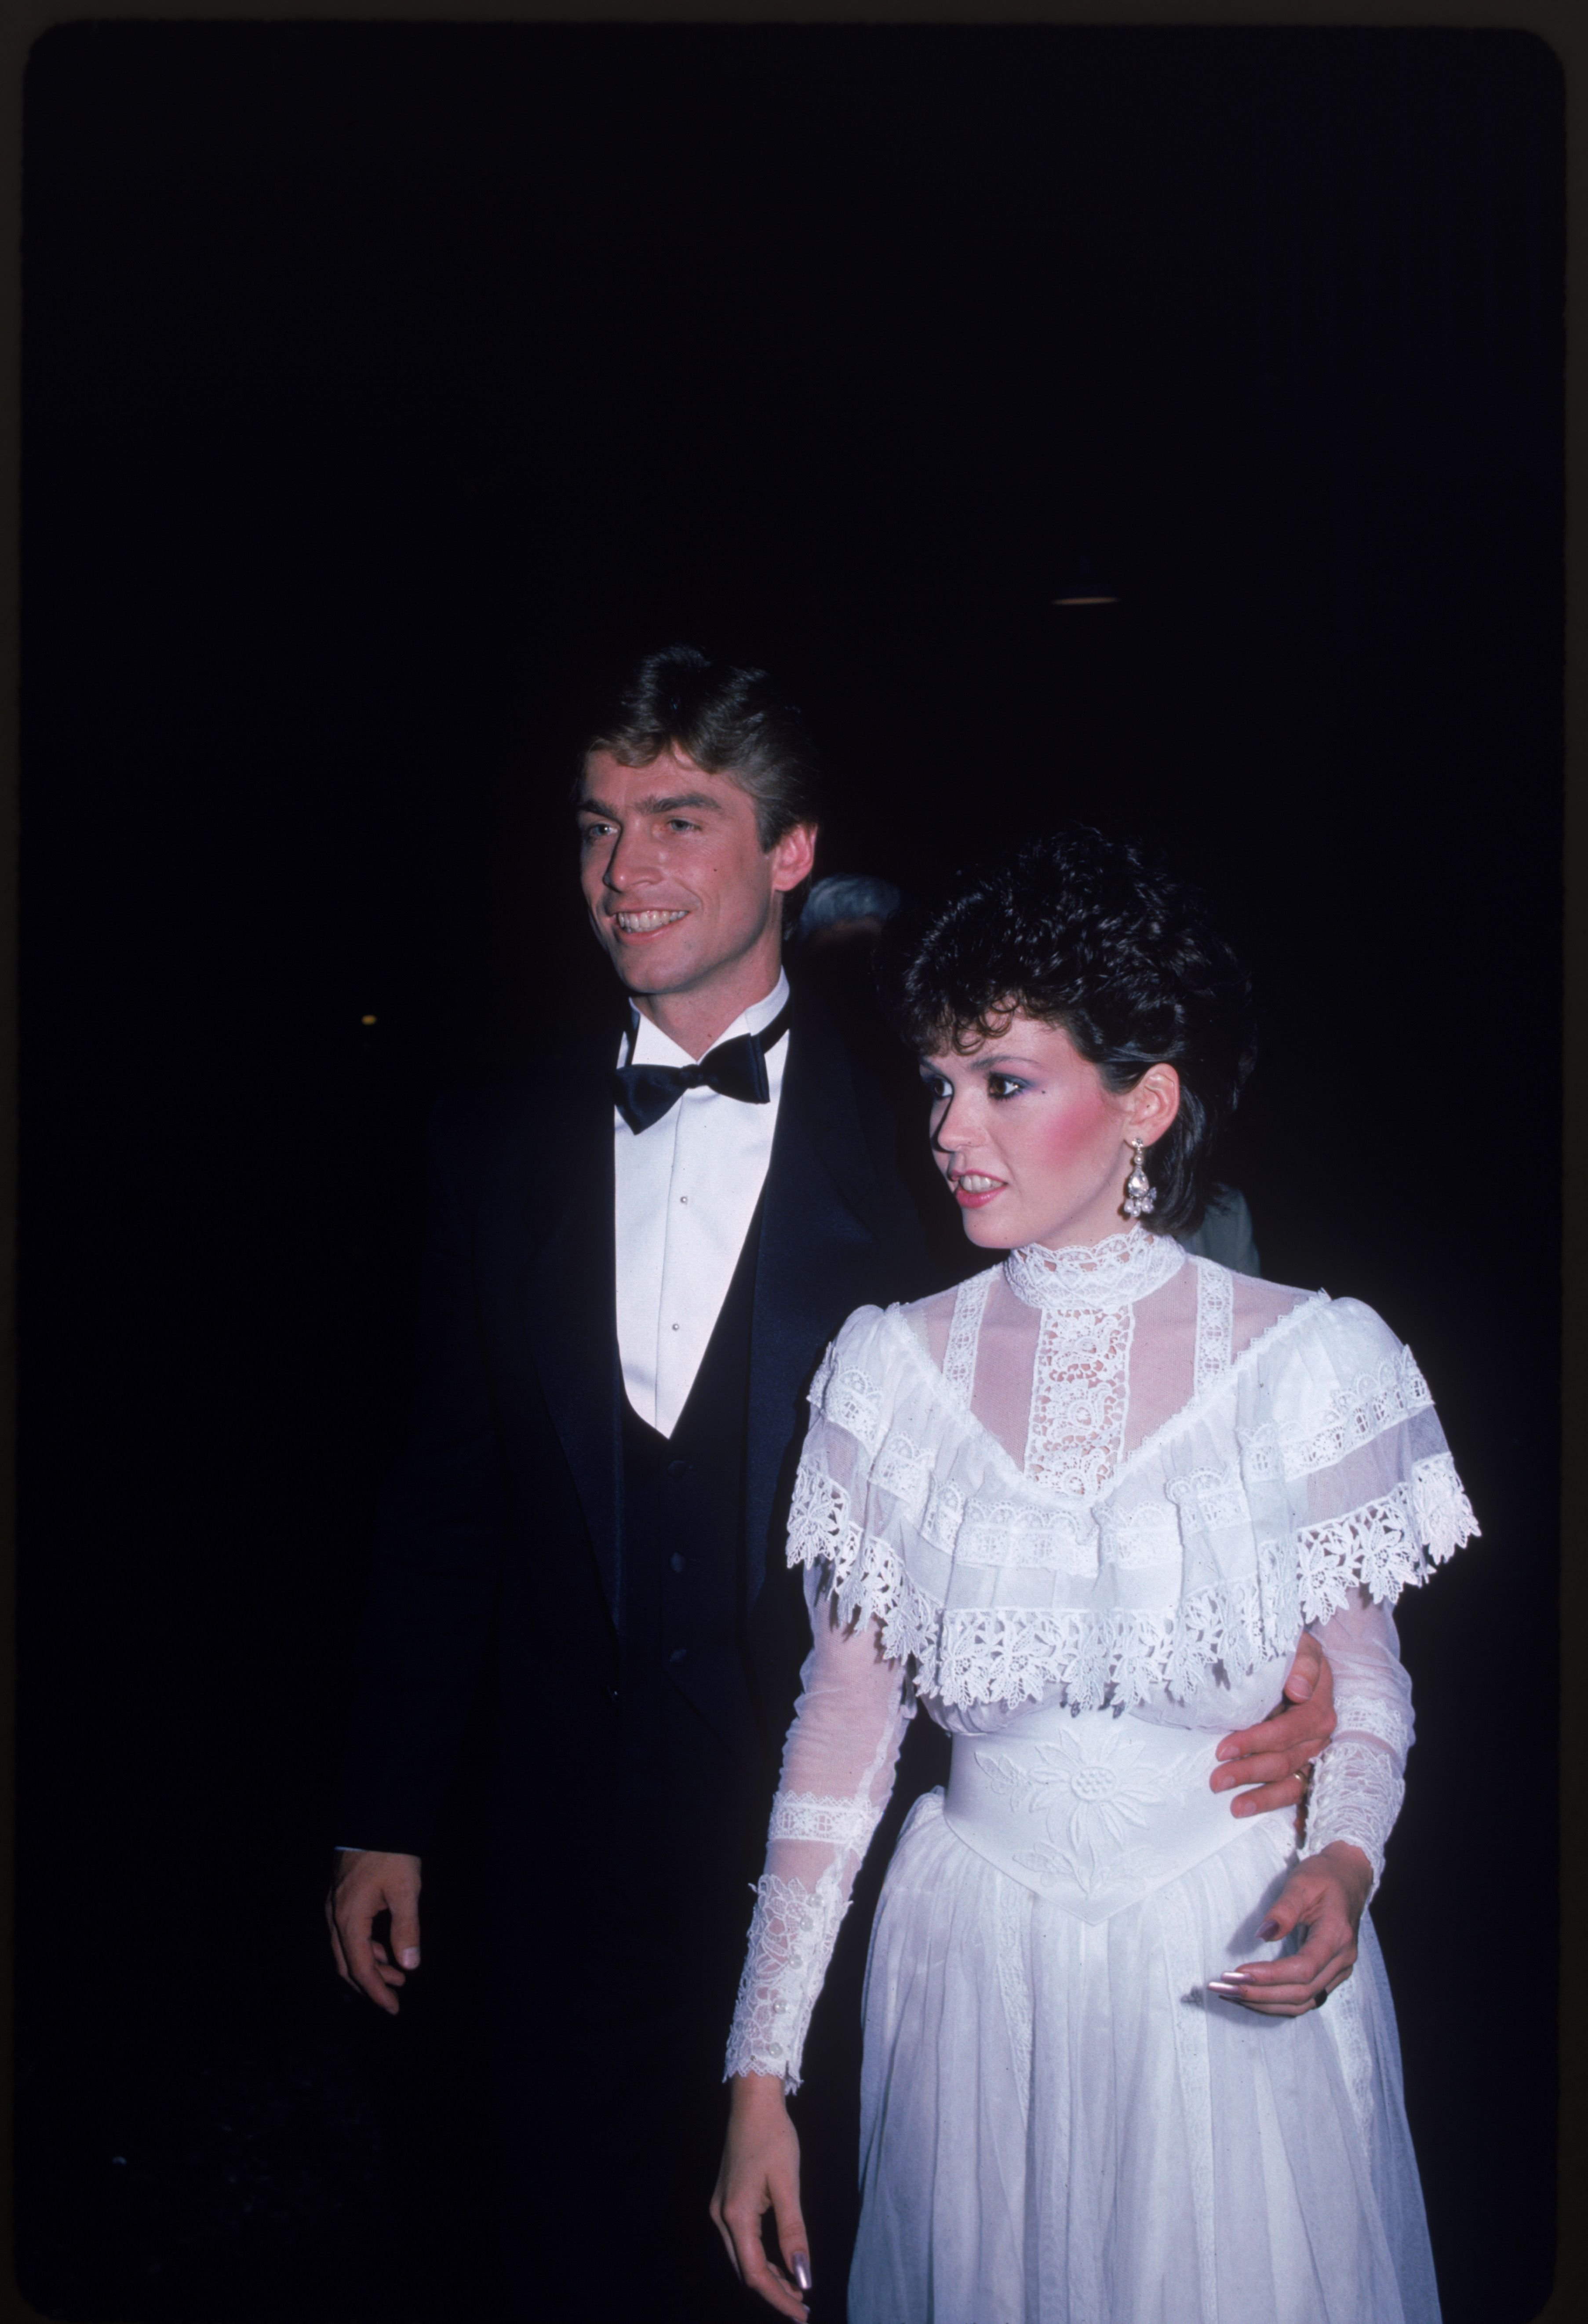 Steve Craig and Marie Osmond in the US on May 01, 1984 | Photo: John Paschal/The LIFE Picture Collection/Getty Images